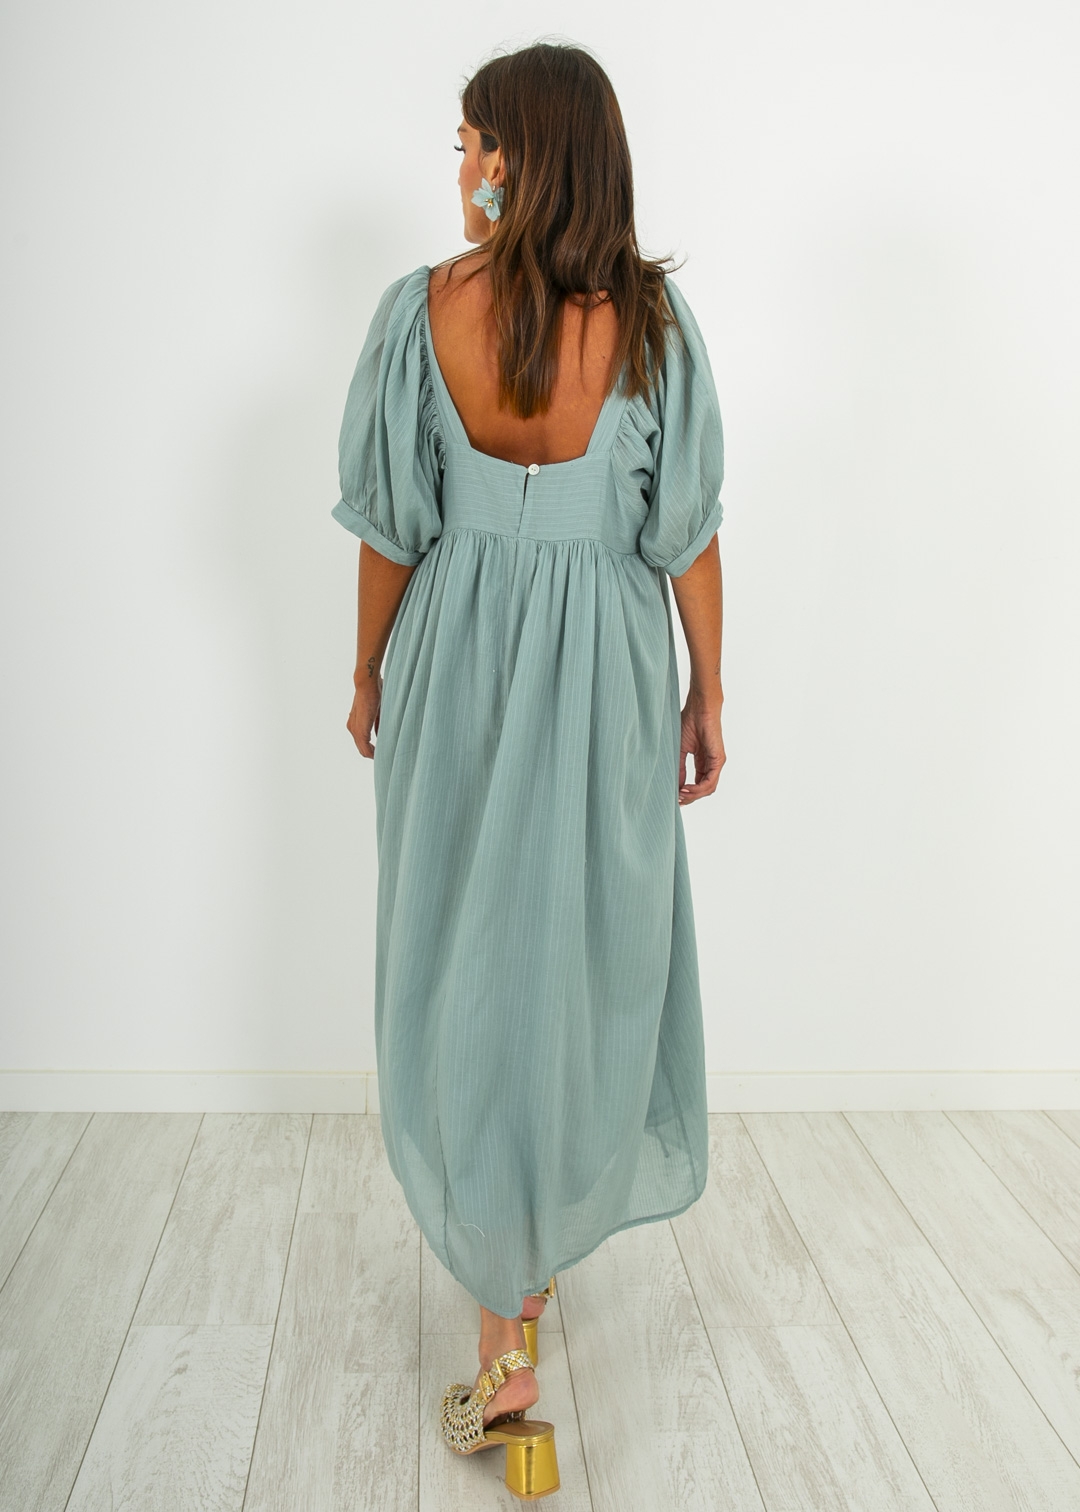 LONG DRESS WITH SHORT PUFFED SLEEVES IN AQUA GREEN